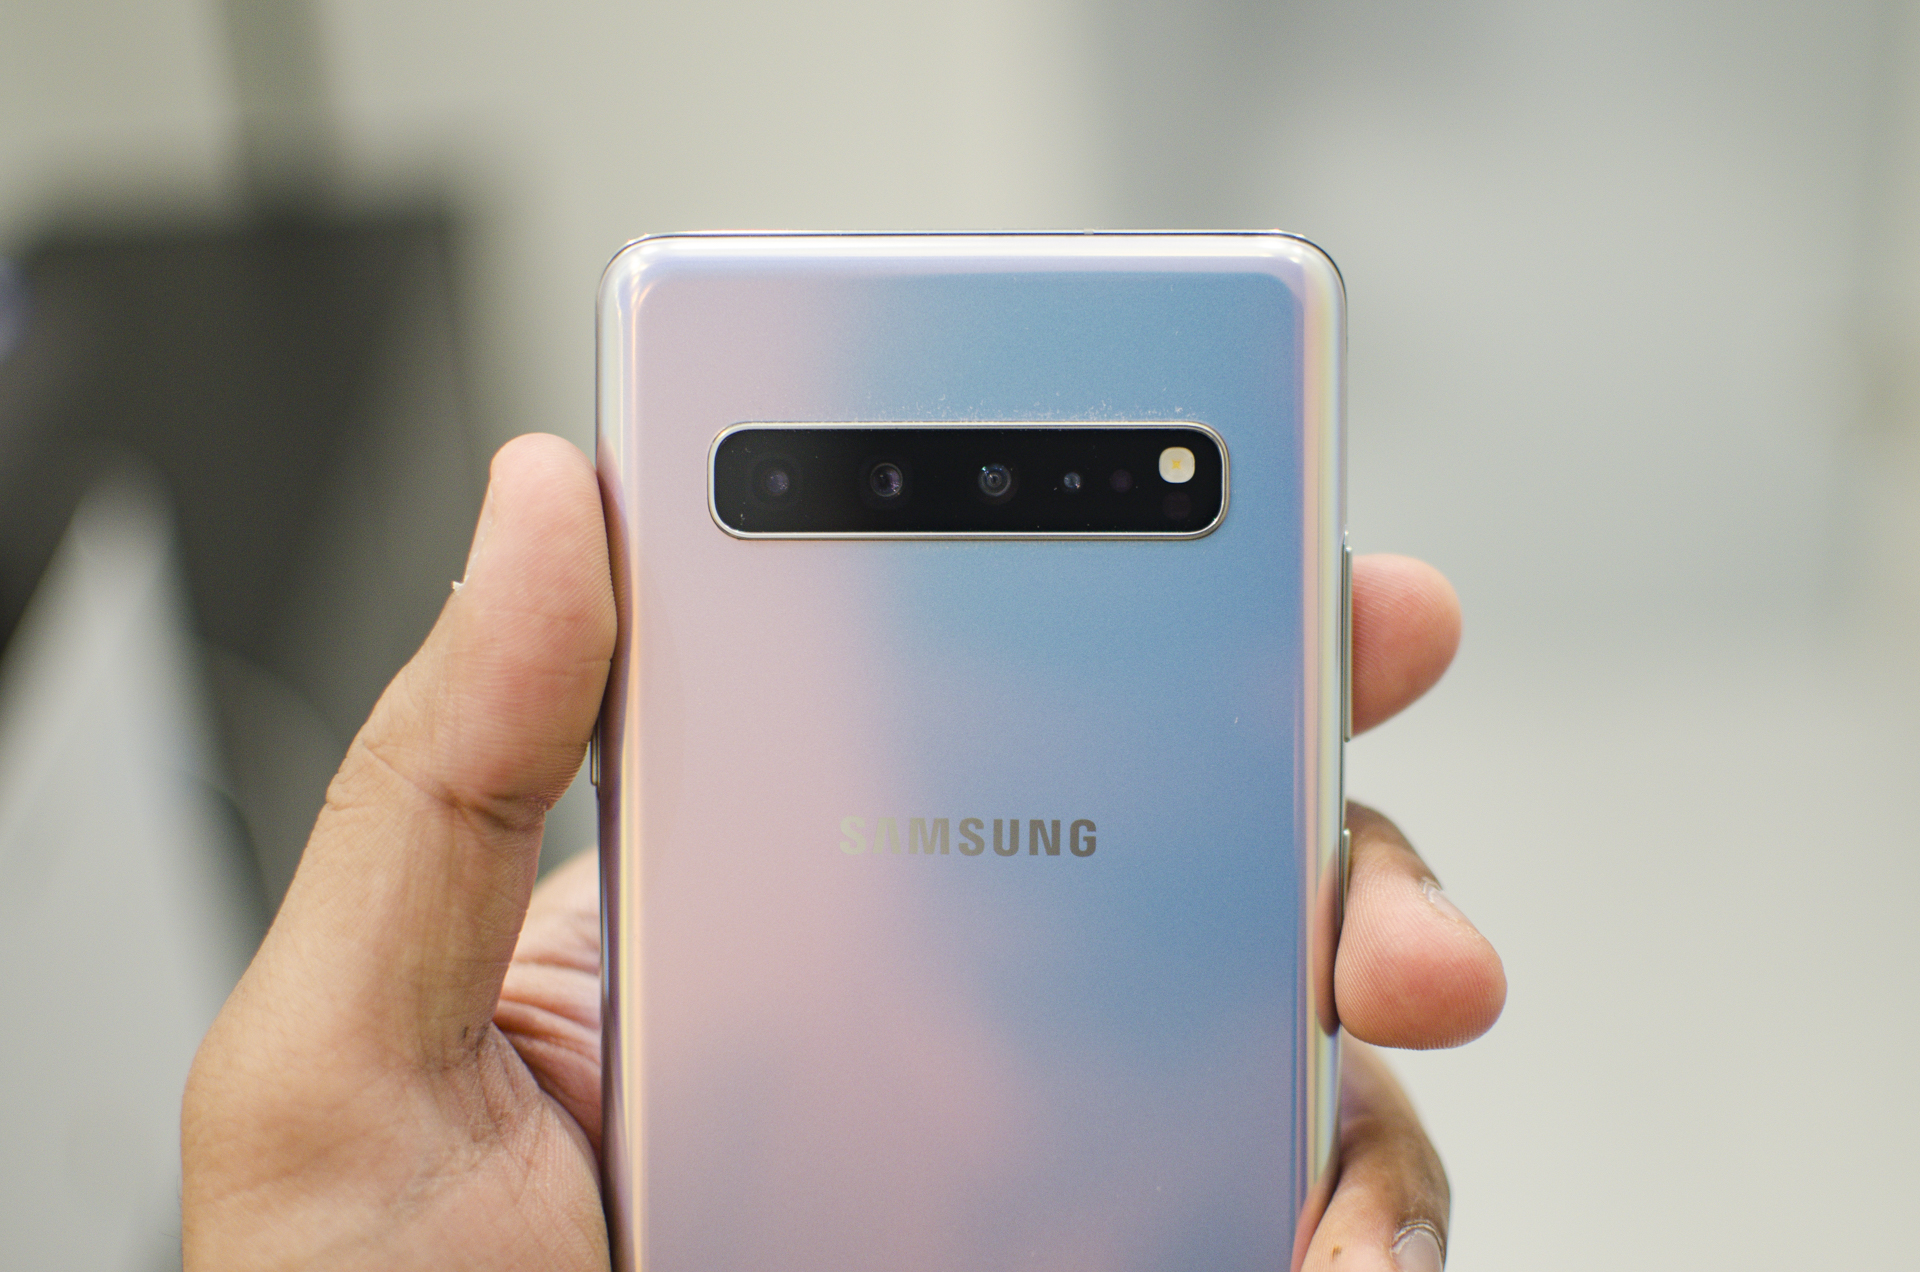 Samsung Galaxy S10 5G Hands-on Review | Digital Trends